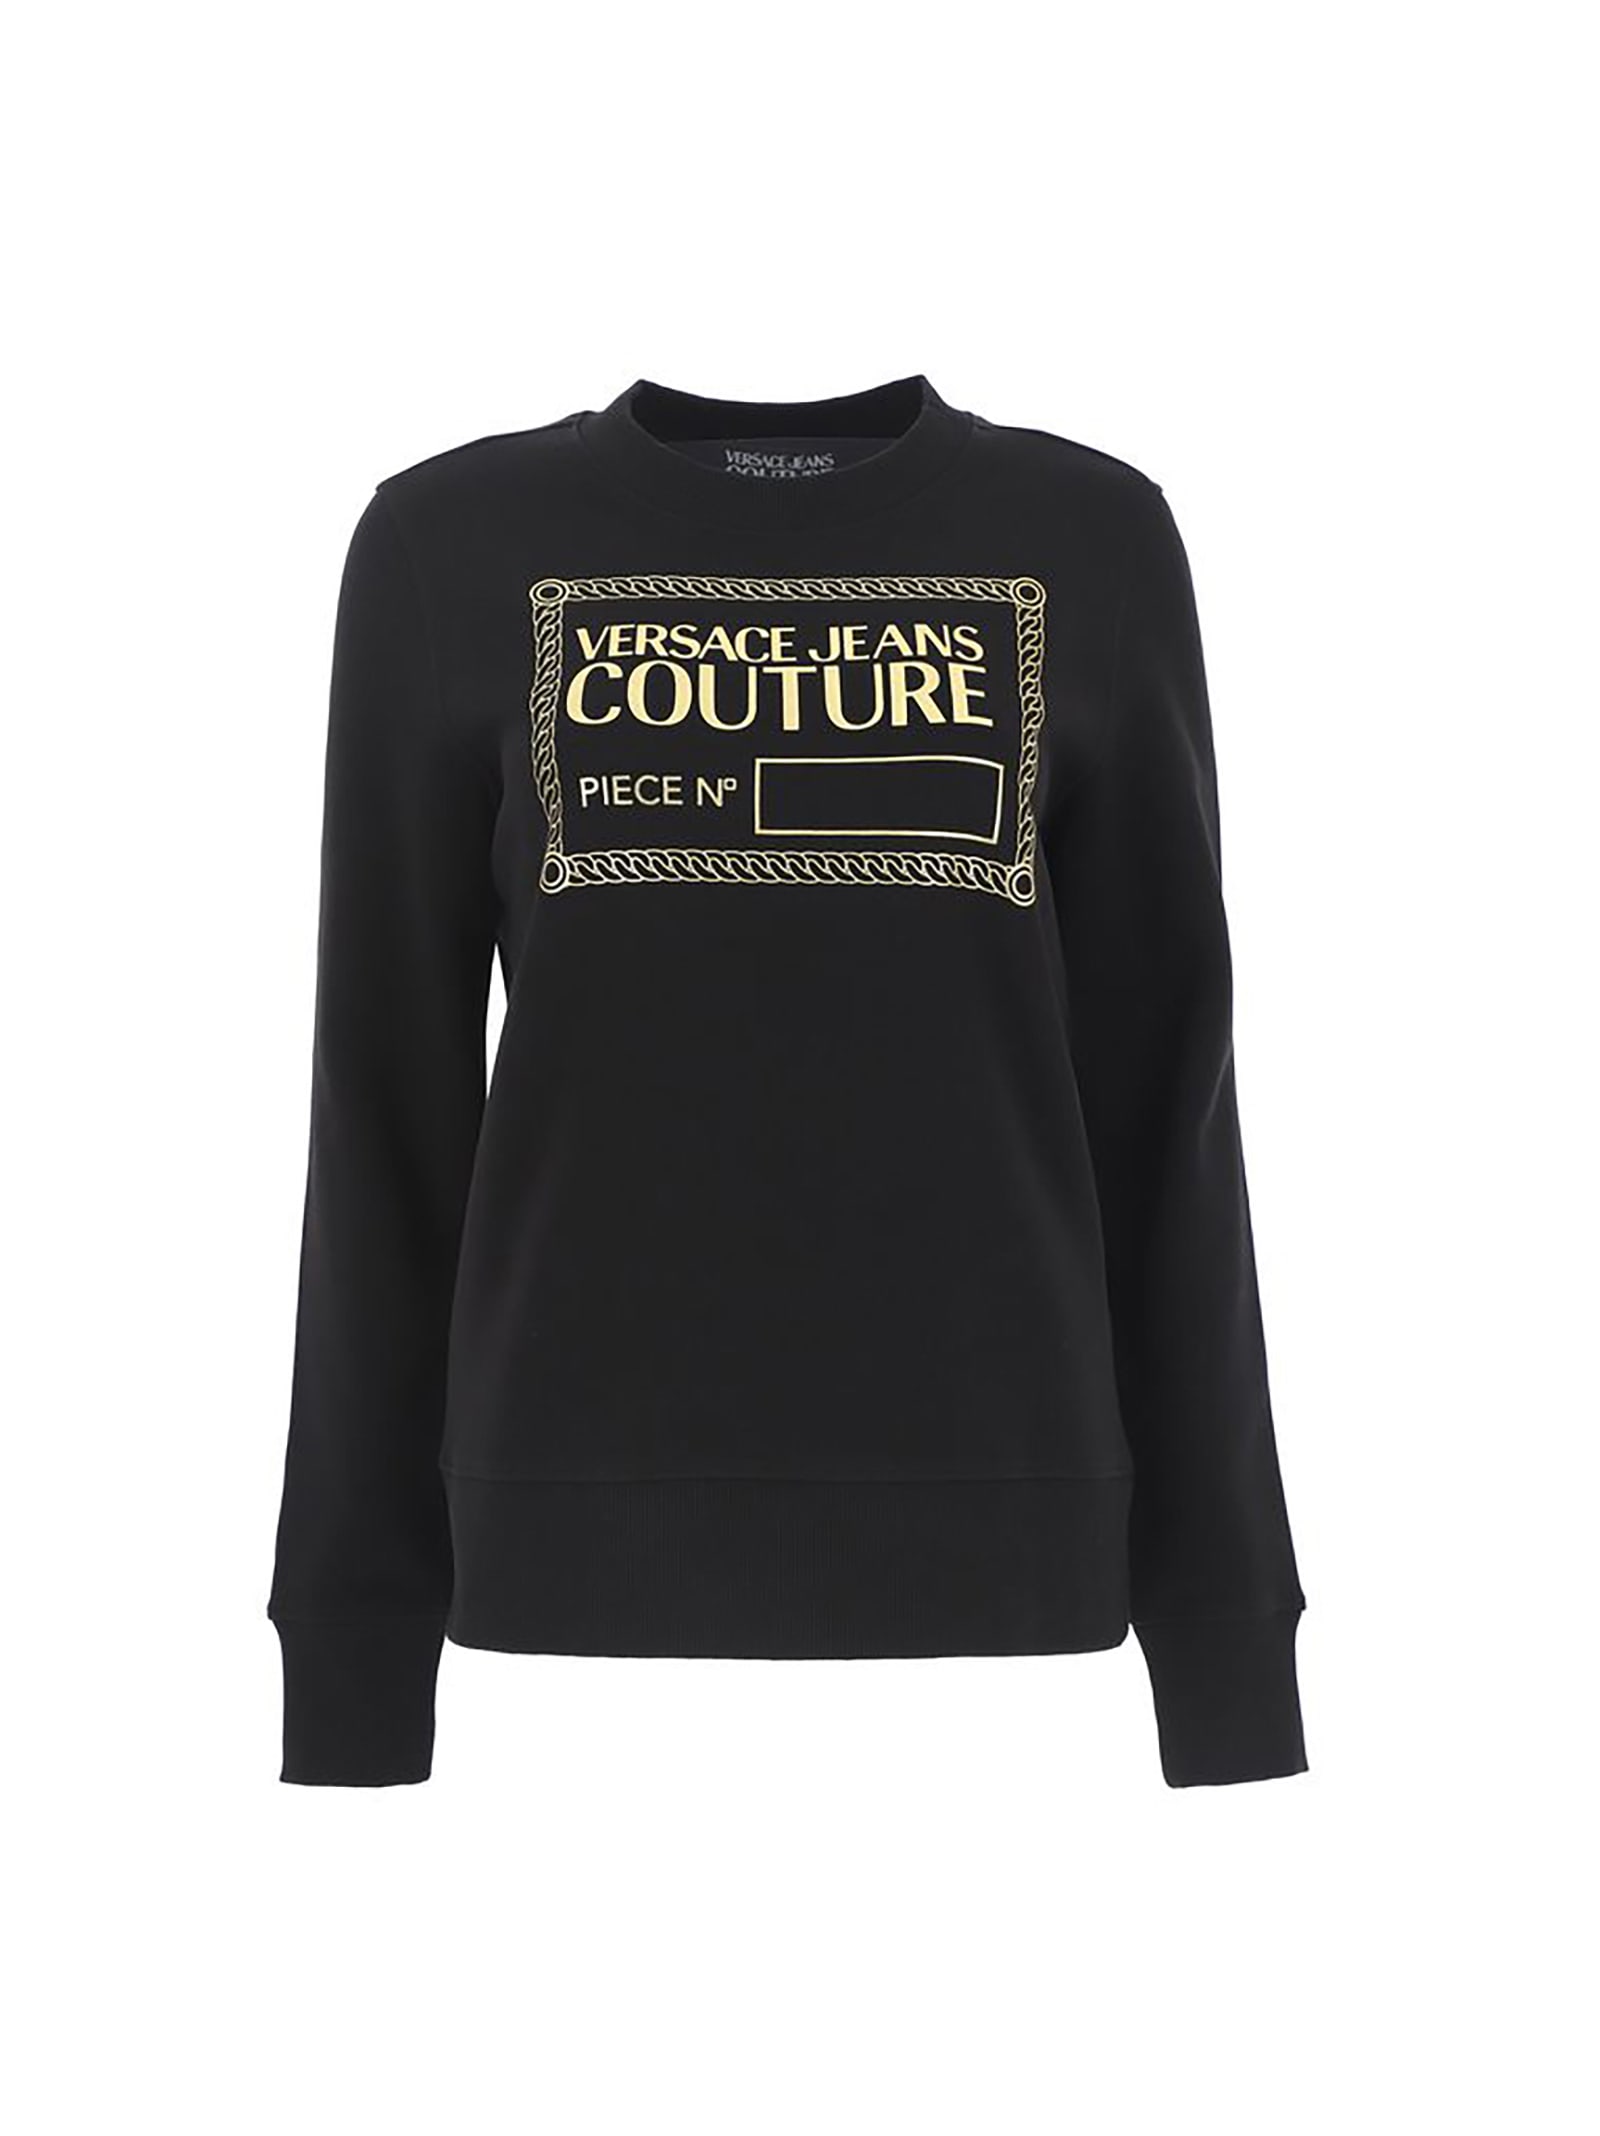 Versace Jeans Couture Cotton Sweatshirt With Piece Number Foil